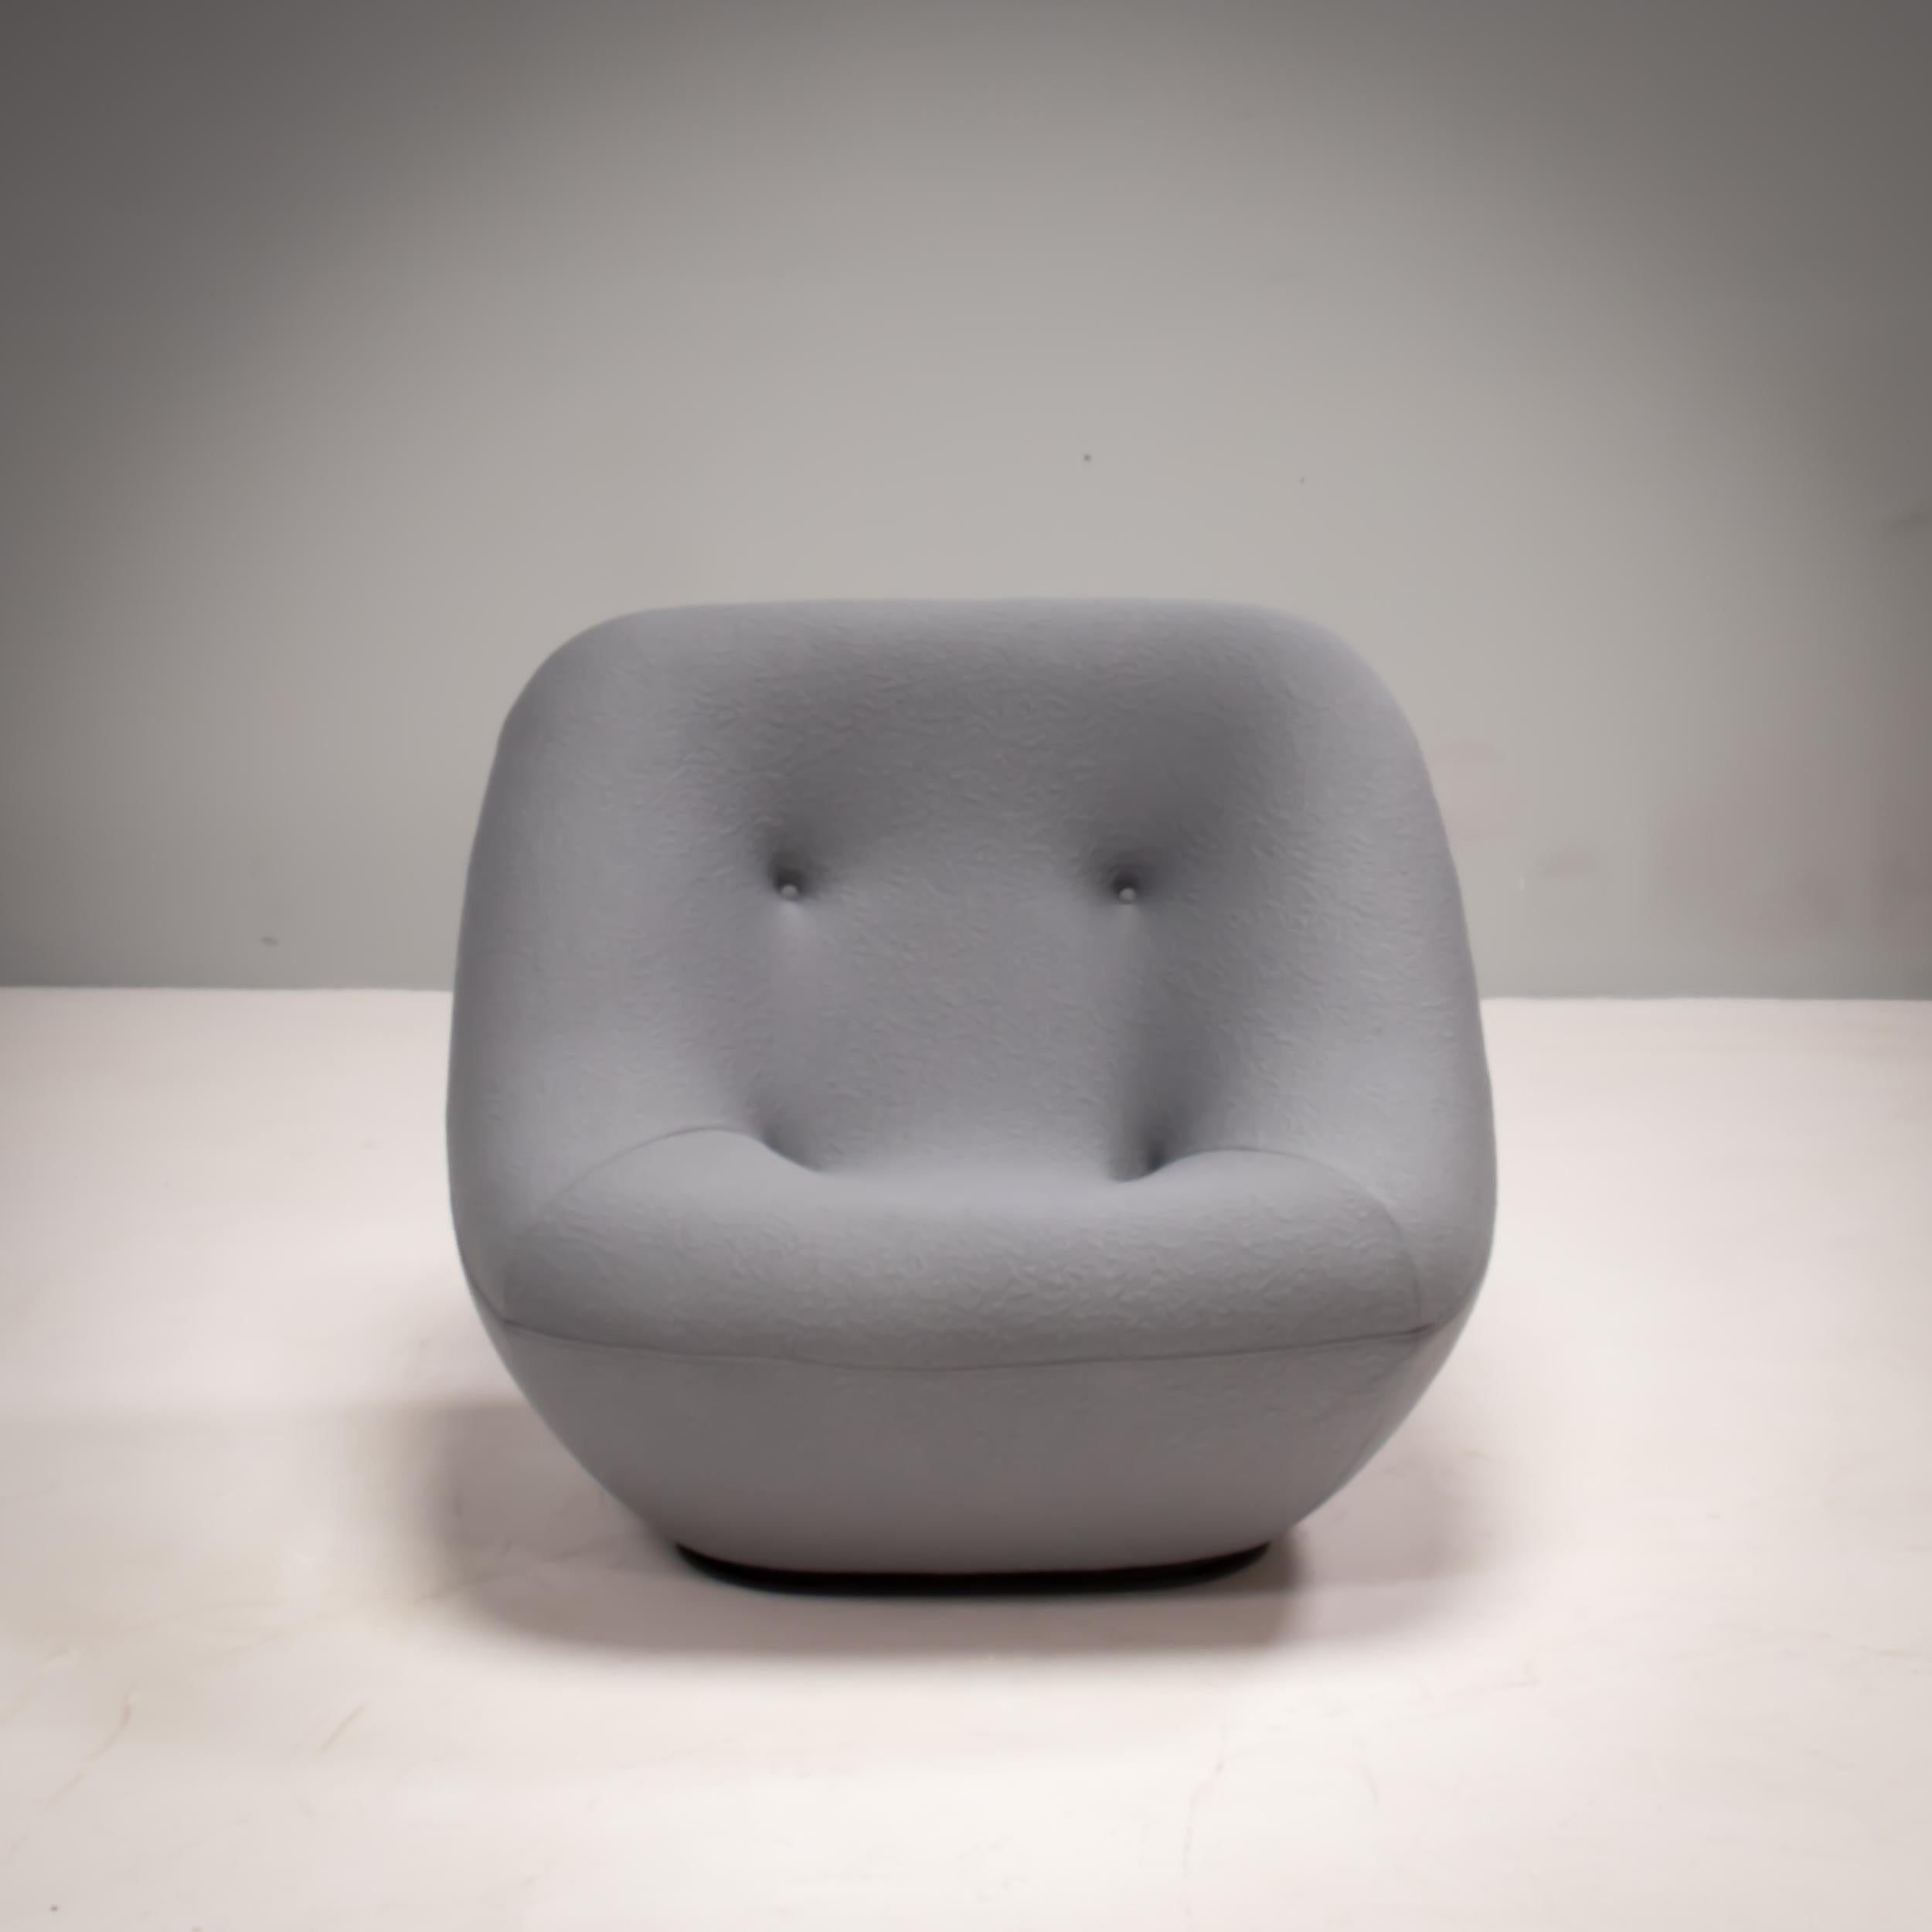 Originally designed by Pierre Paulin in 1975, the Bonnie armchair became an instant design icon and was reissued by Ligne Roset in 2018.

The chair has a sculptural form, with a scooped out seat and is fully upholstered in the grey original